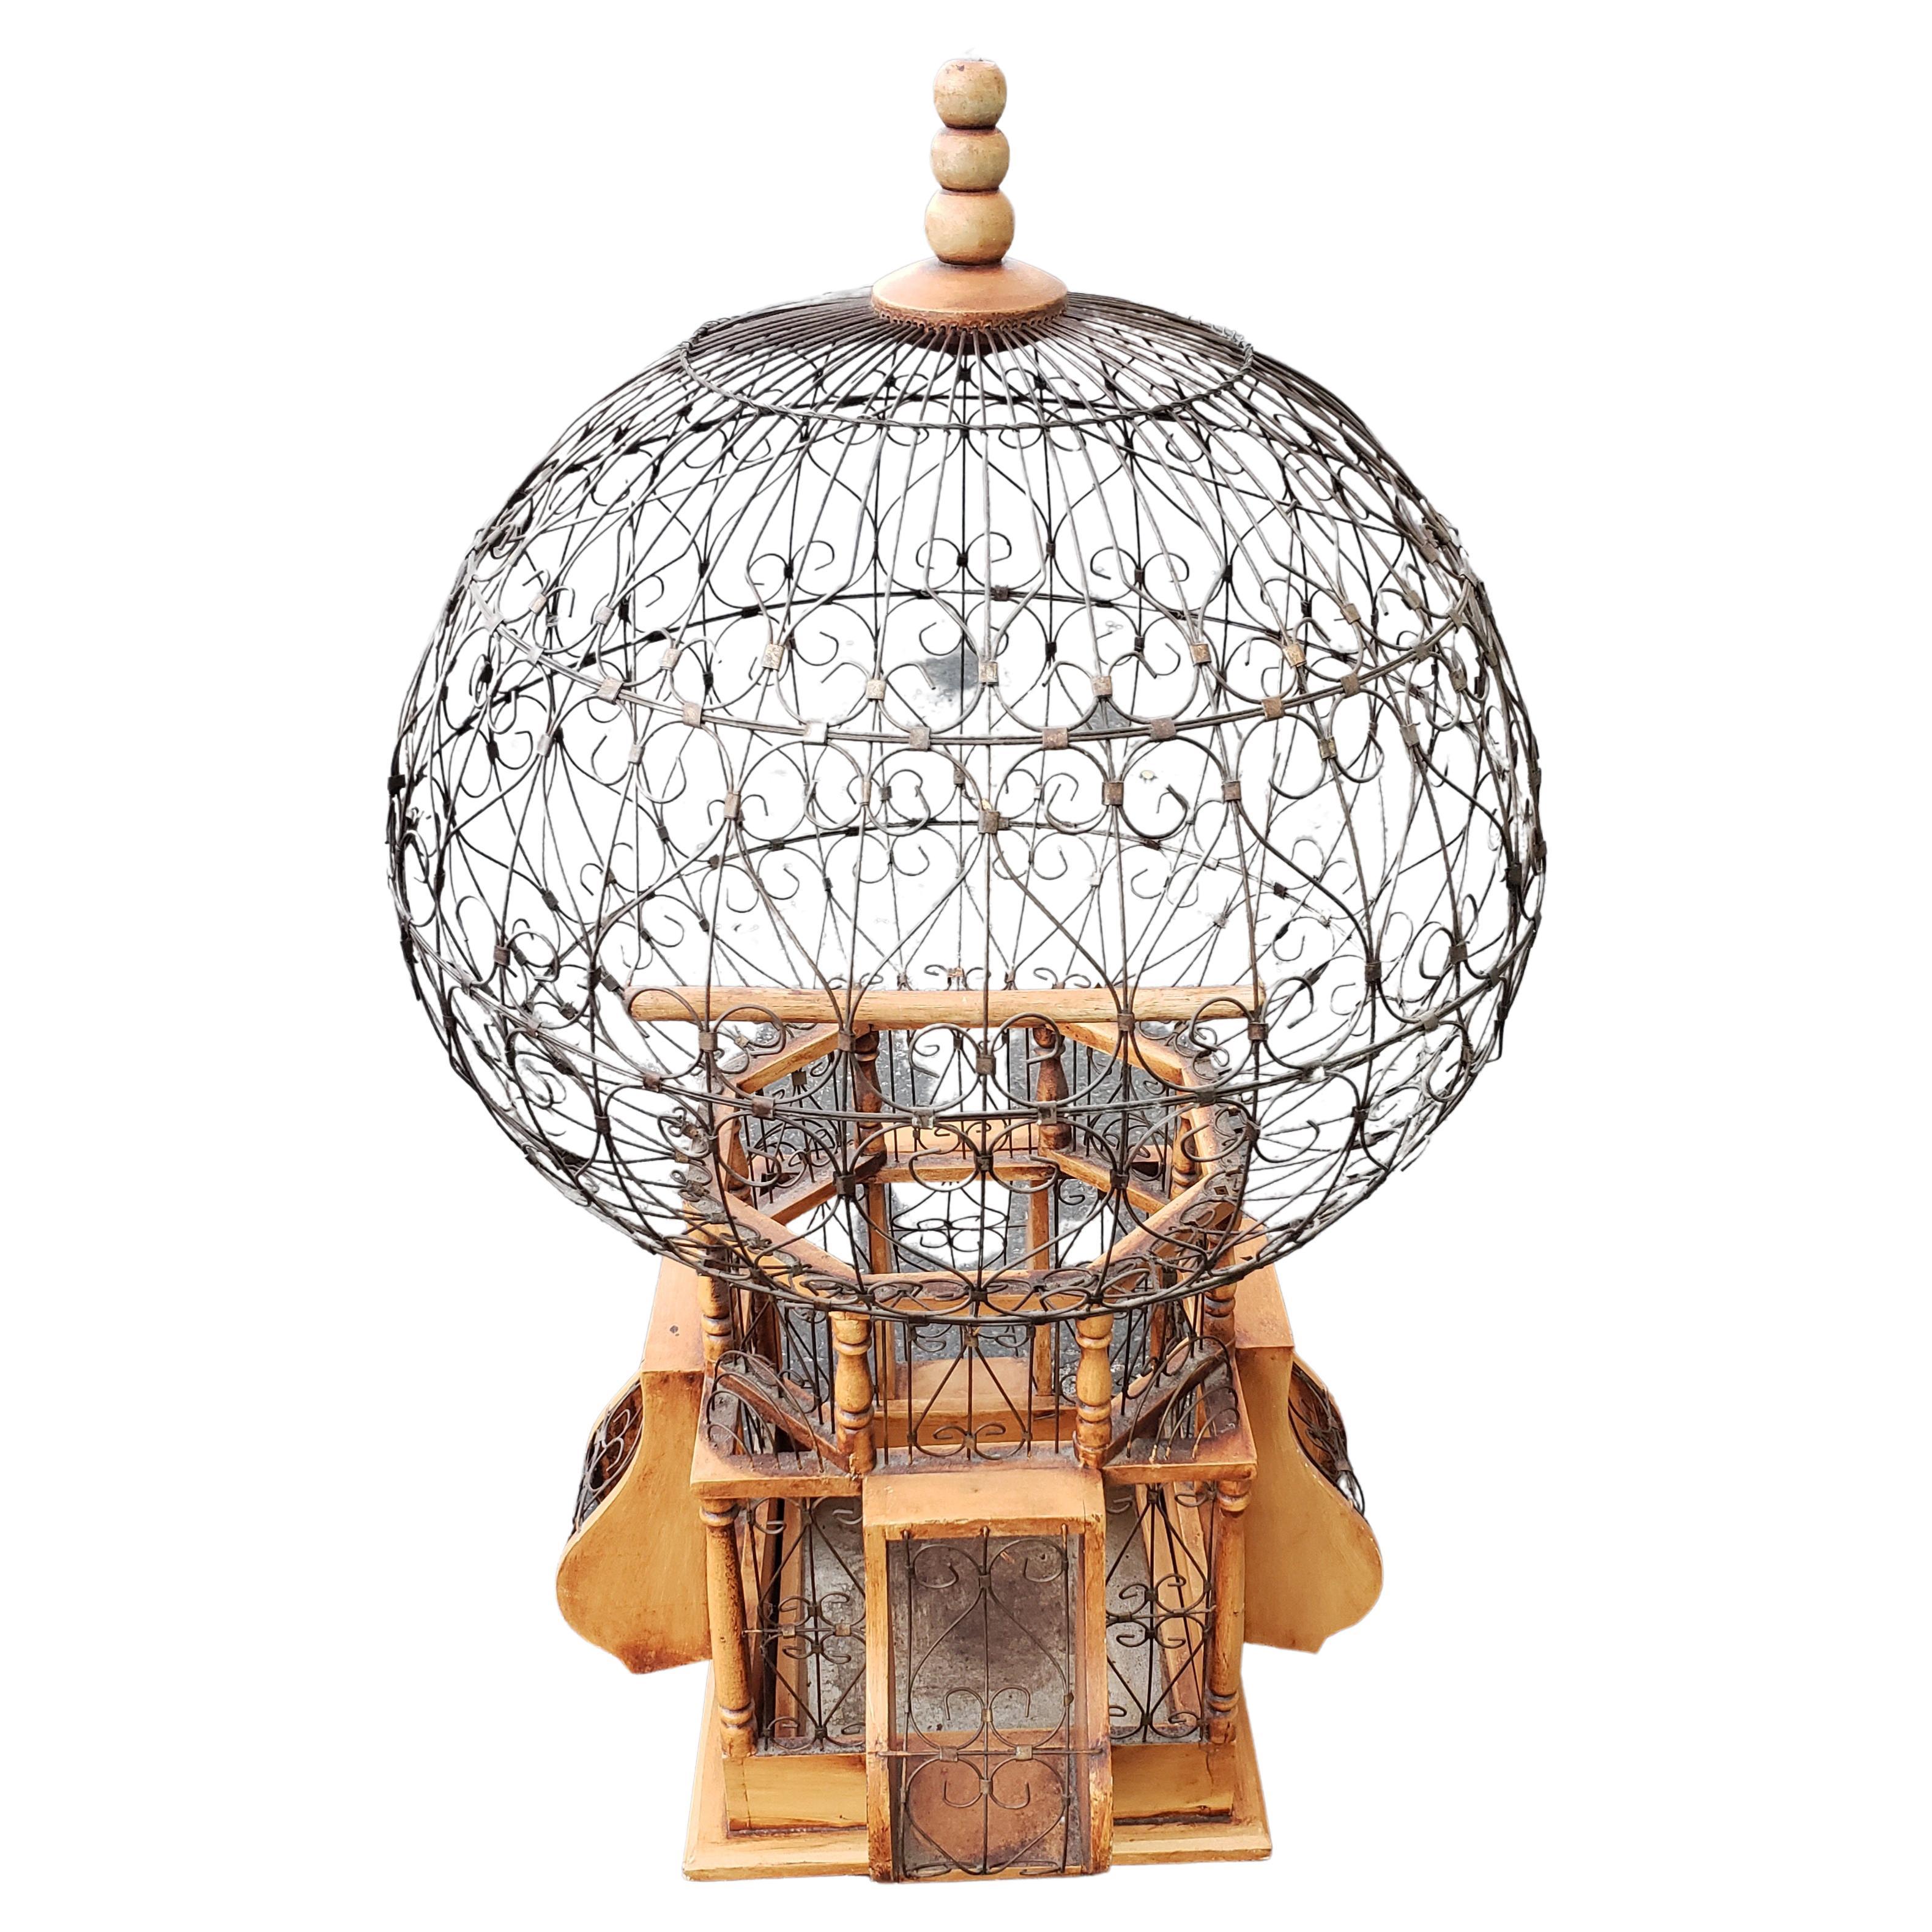 What does a birdcage symbolize?